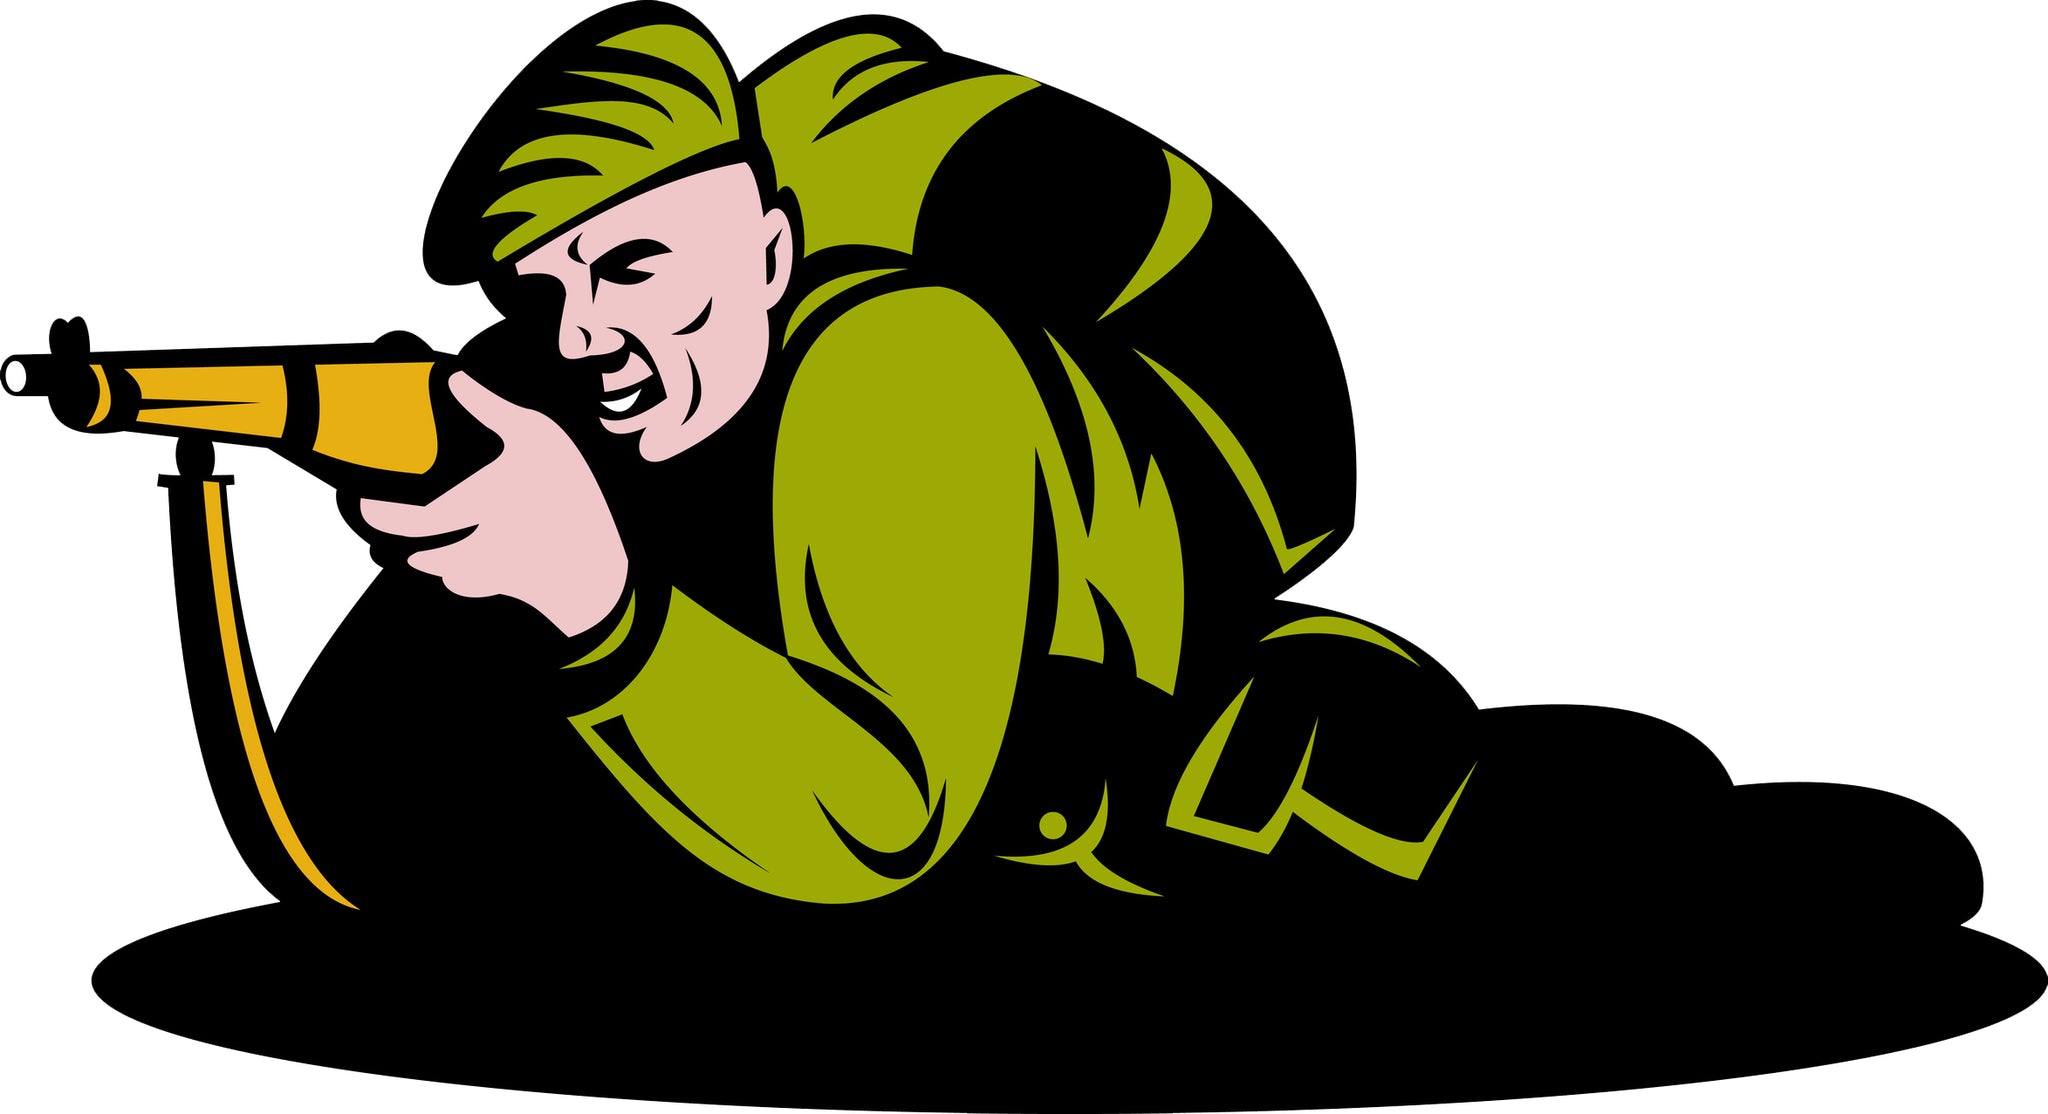 Cool Vintage Retro Military Soldier in Trench Vinyl Decal Sticker